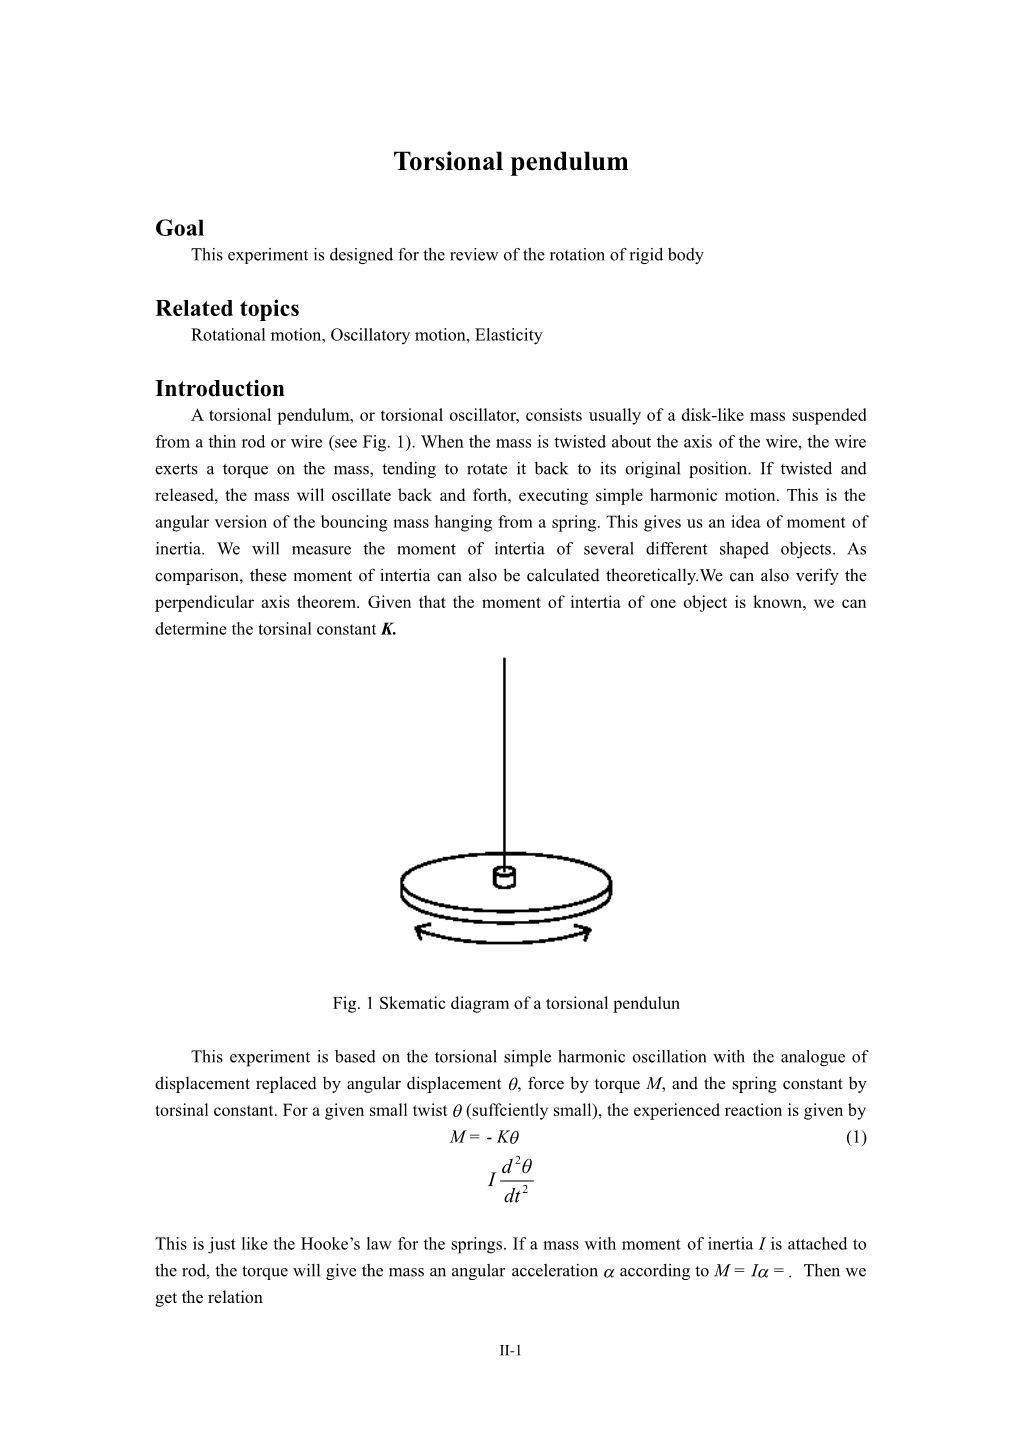 This Experiment Is Designed for the Review of the Rotation of Rigid Body